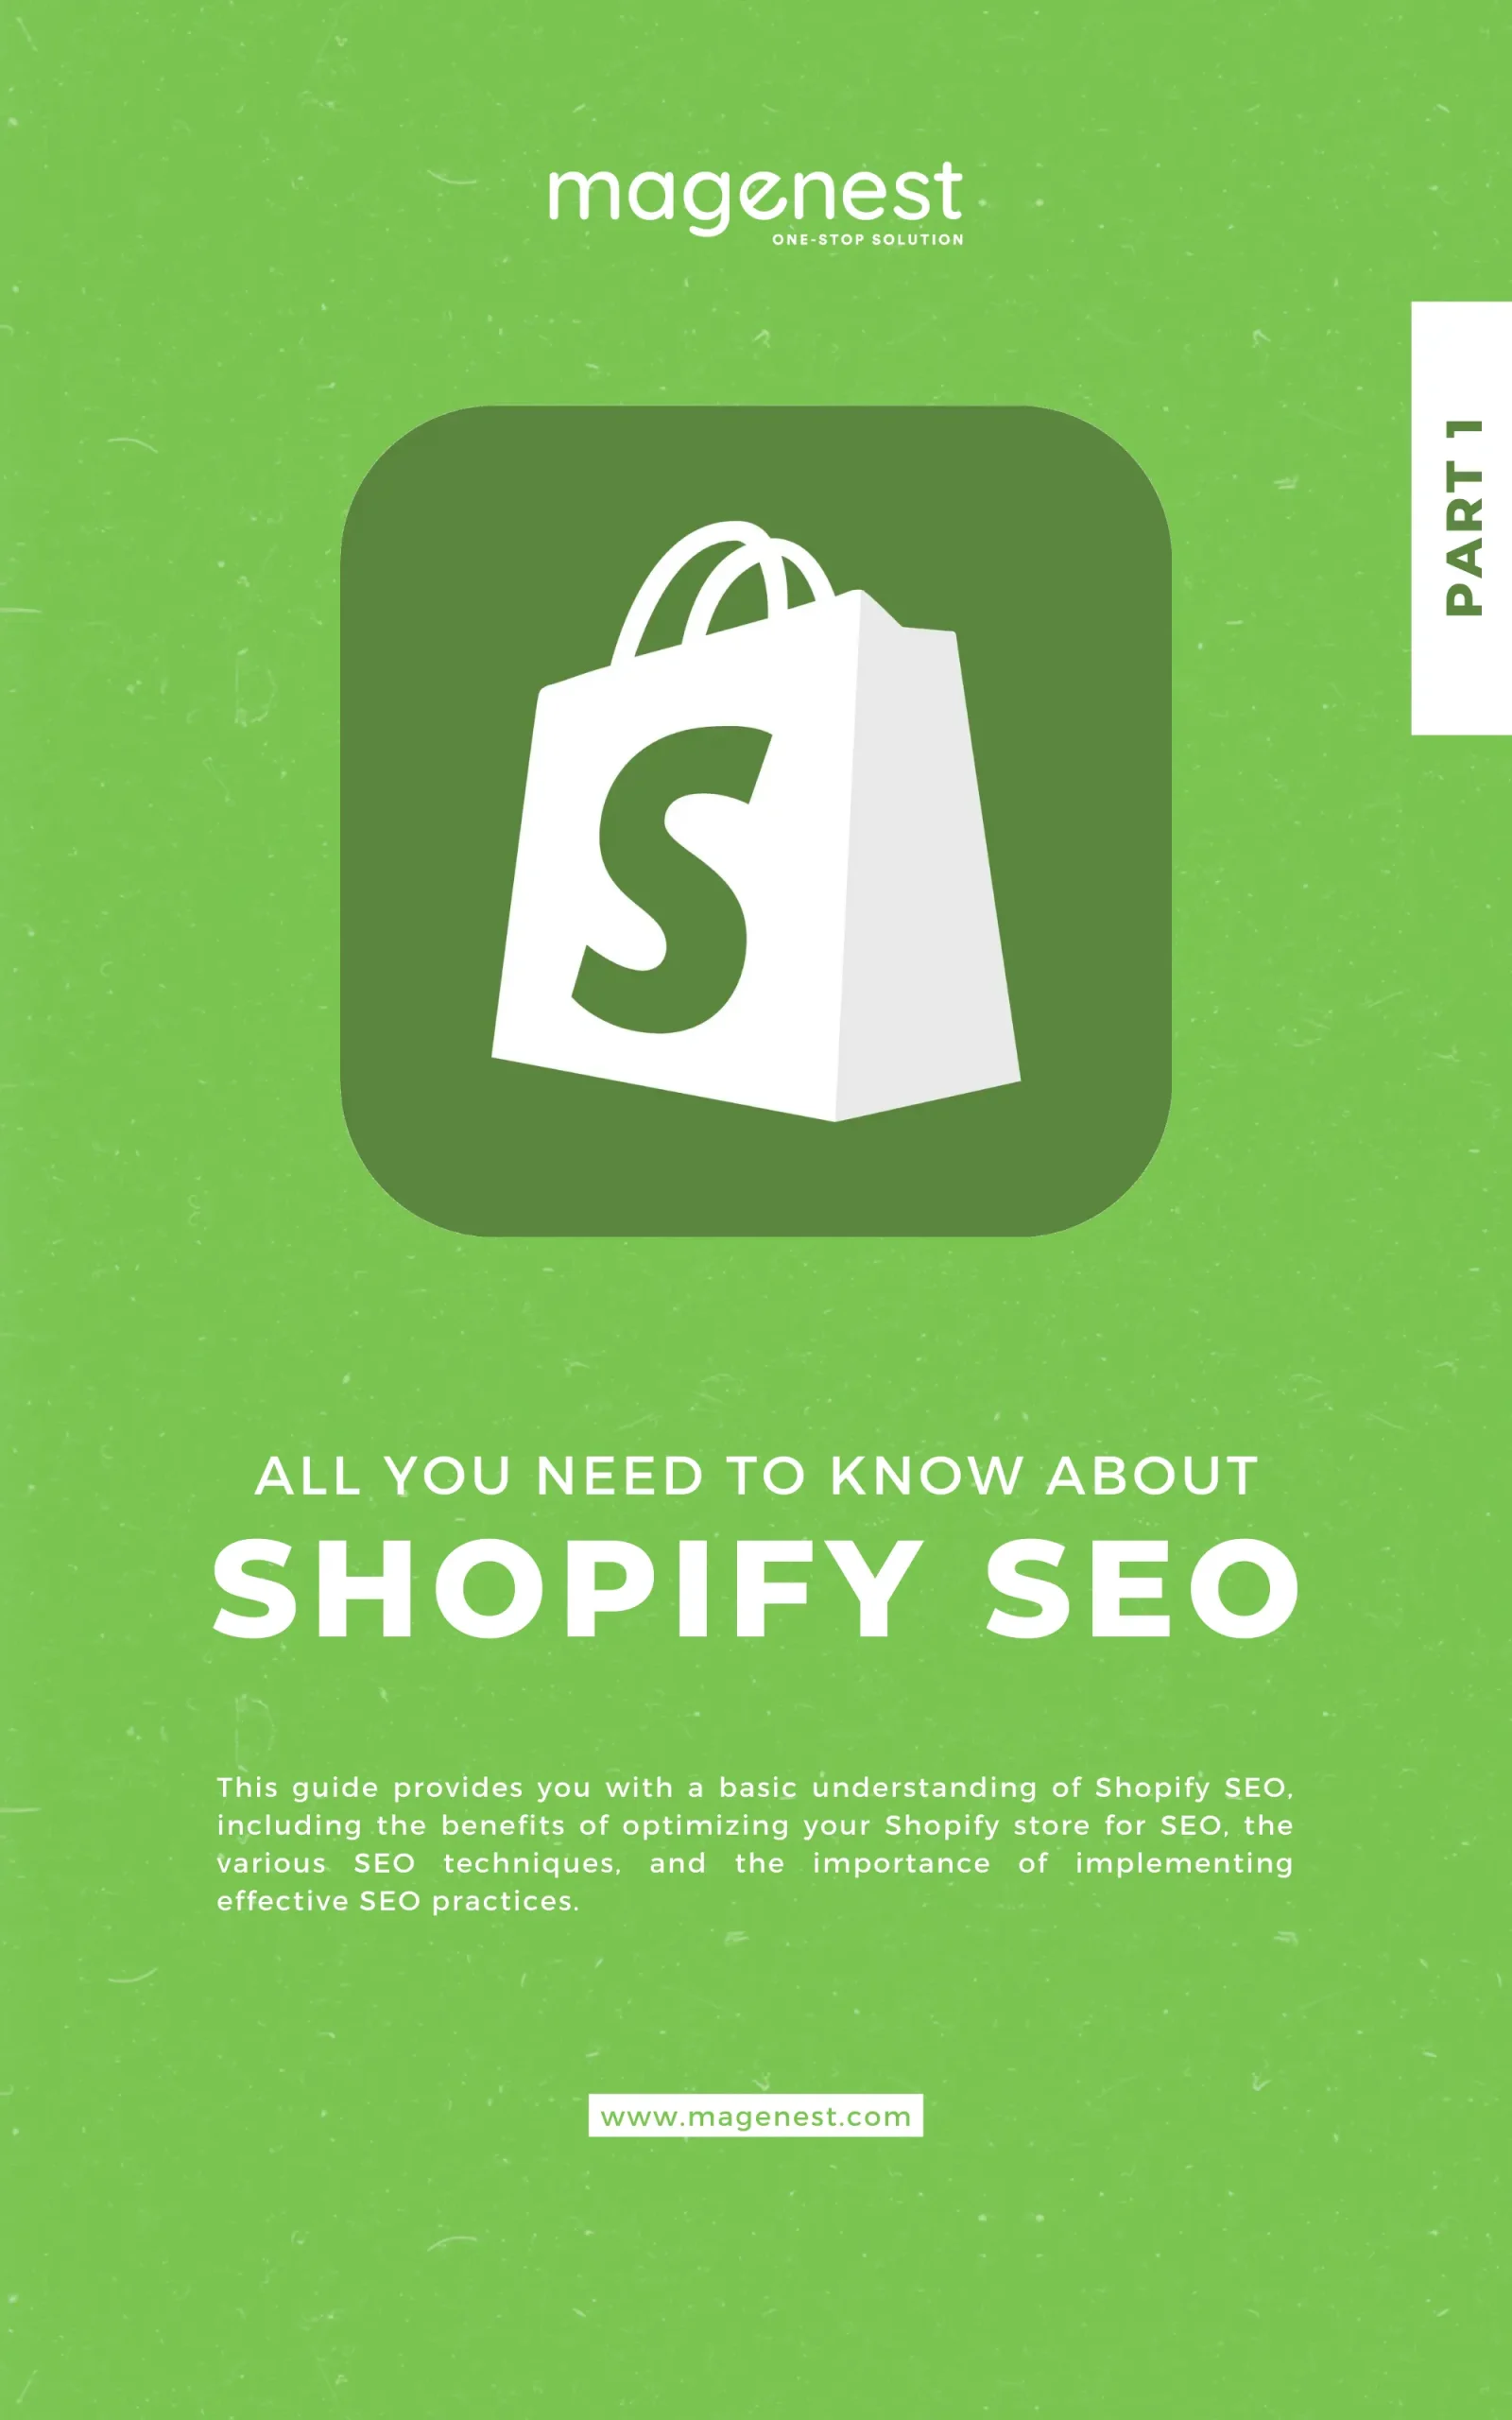 eBook SHOPIFY SEO GUIDE PART 1: All you need to know about Shopify SEO0